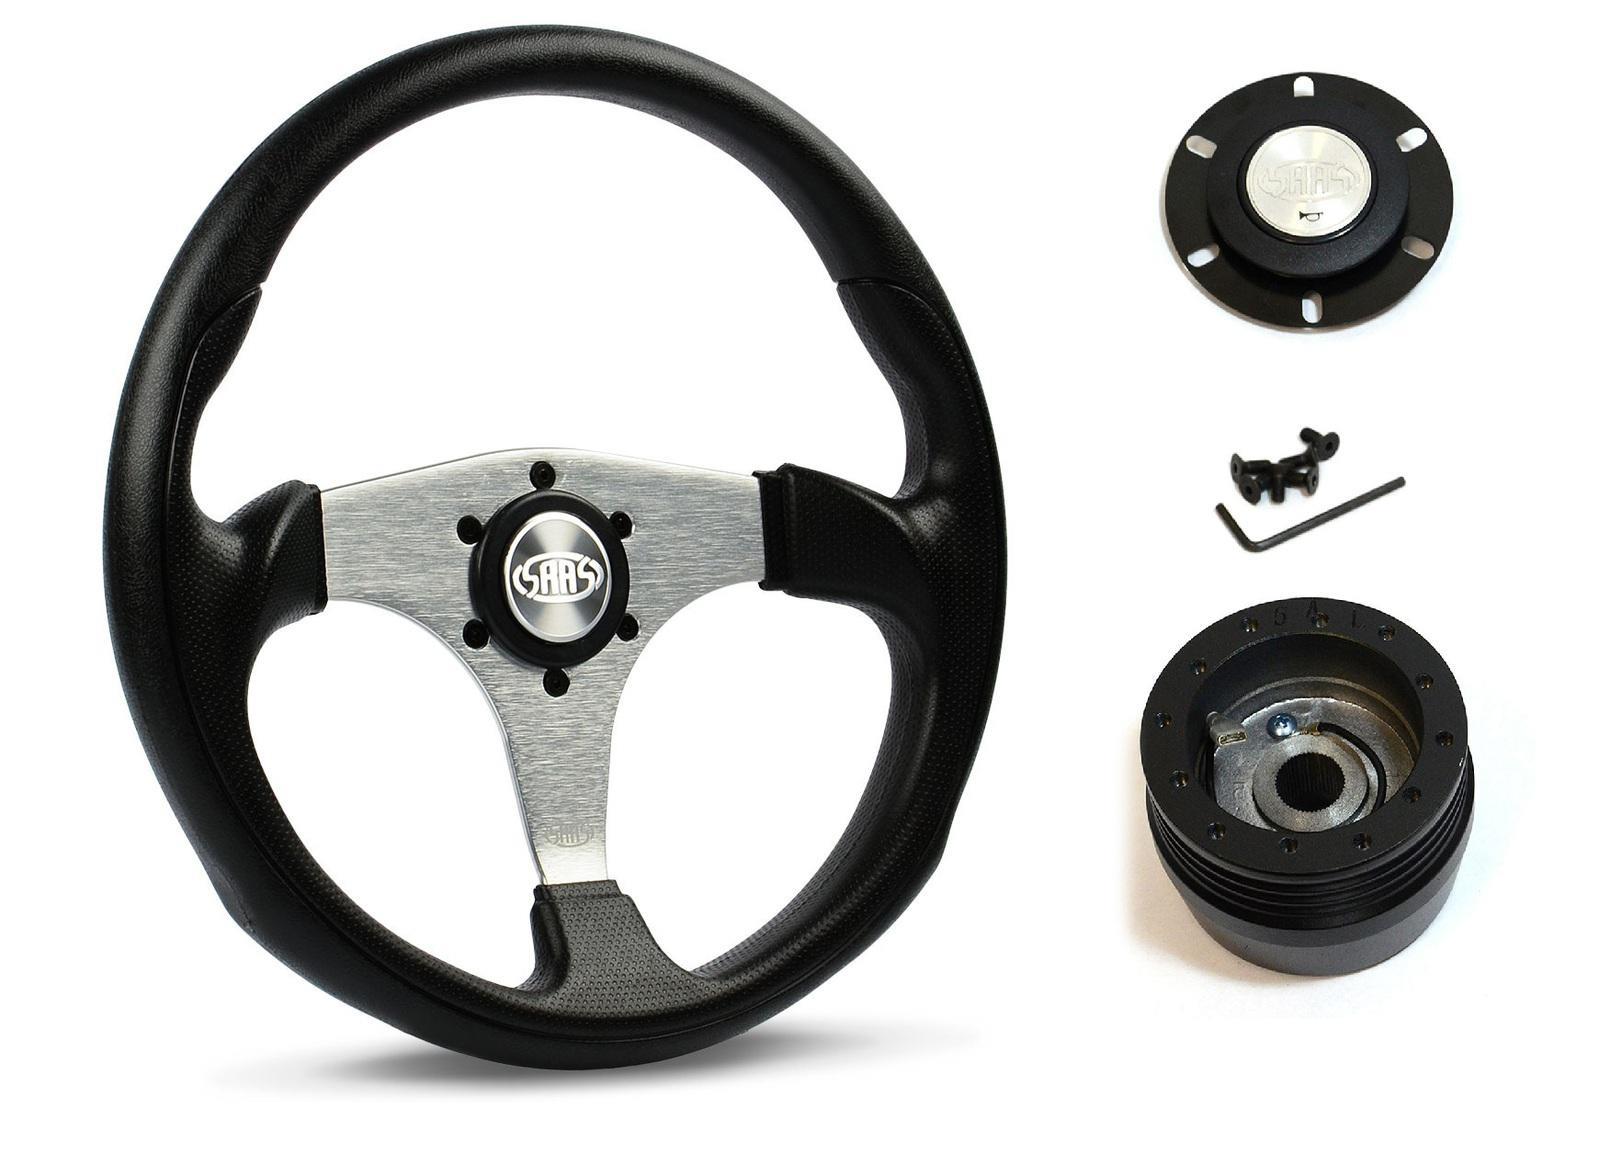 SAAS Steering Wheel Poly 14" ADR Octane Brushed Alloy Spoke SW515S-R and SAAS boss kit for MG 1300 MK2 GT 1971-1978